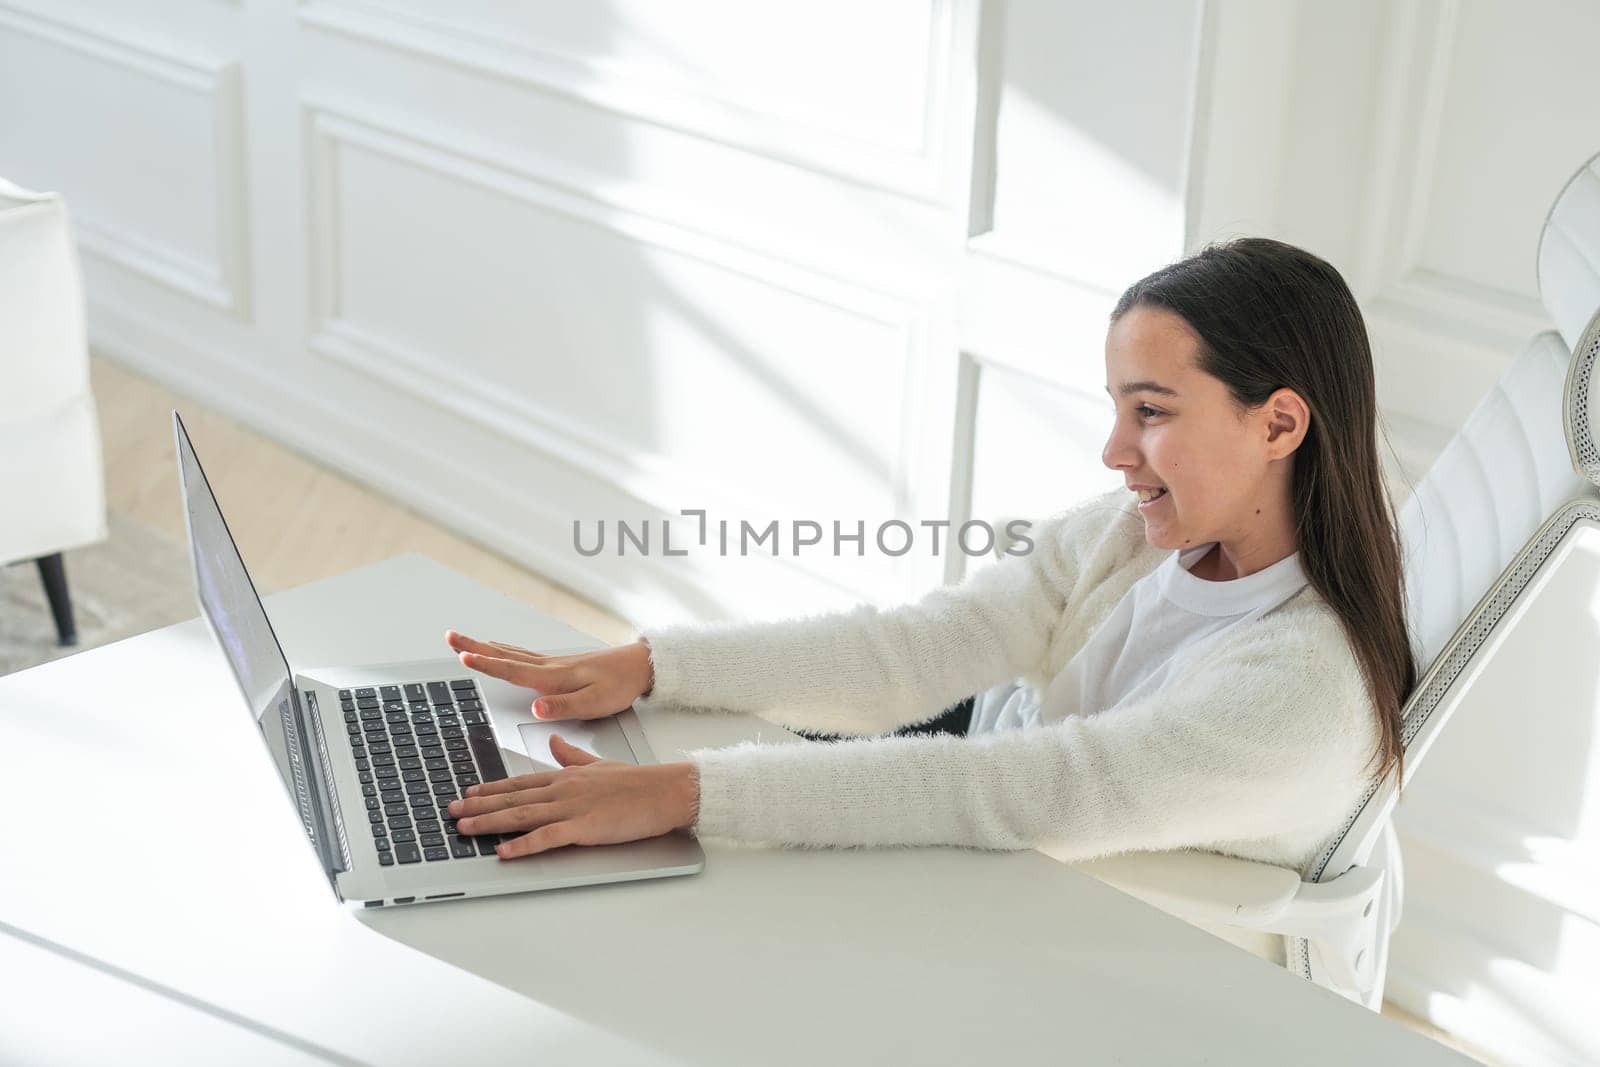 Online Fun. Smiling Middle Eastern Preteen Girl Using Laptop Computer, Relaxing Playing Games And Enjoying Web Entertainment At Home. Digital Weekend Leisure Concept. High quality photo